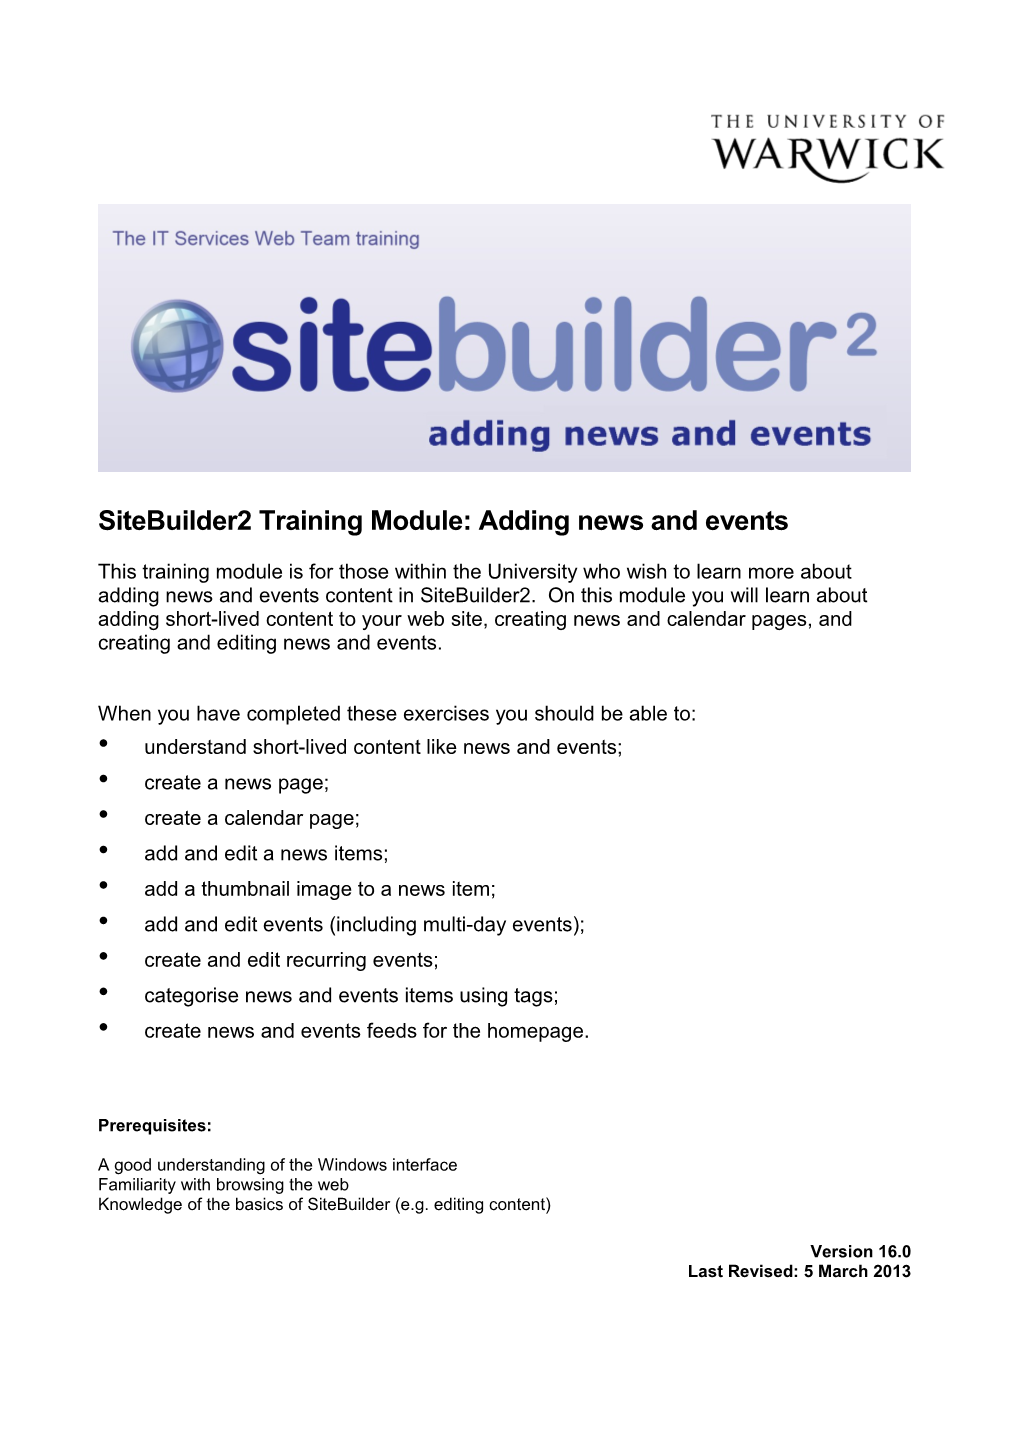 Sitebuilder2 Training Module: Adding News and Events